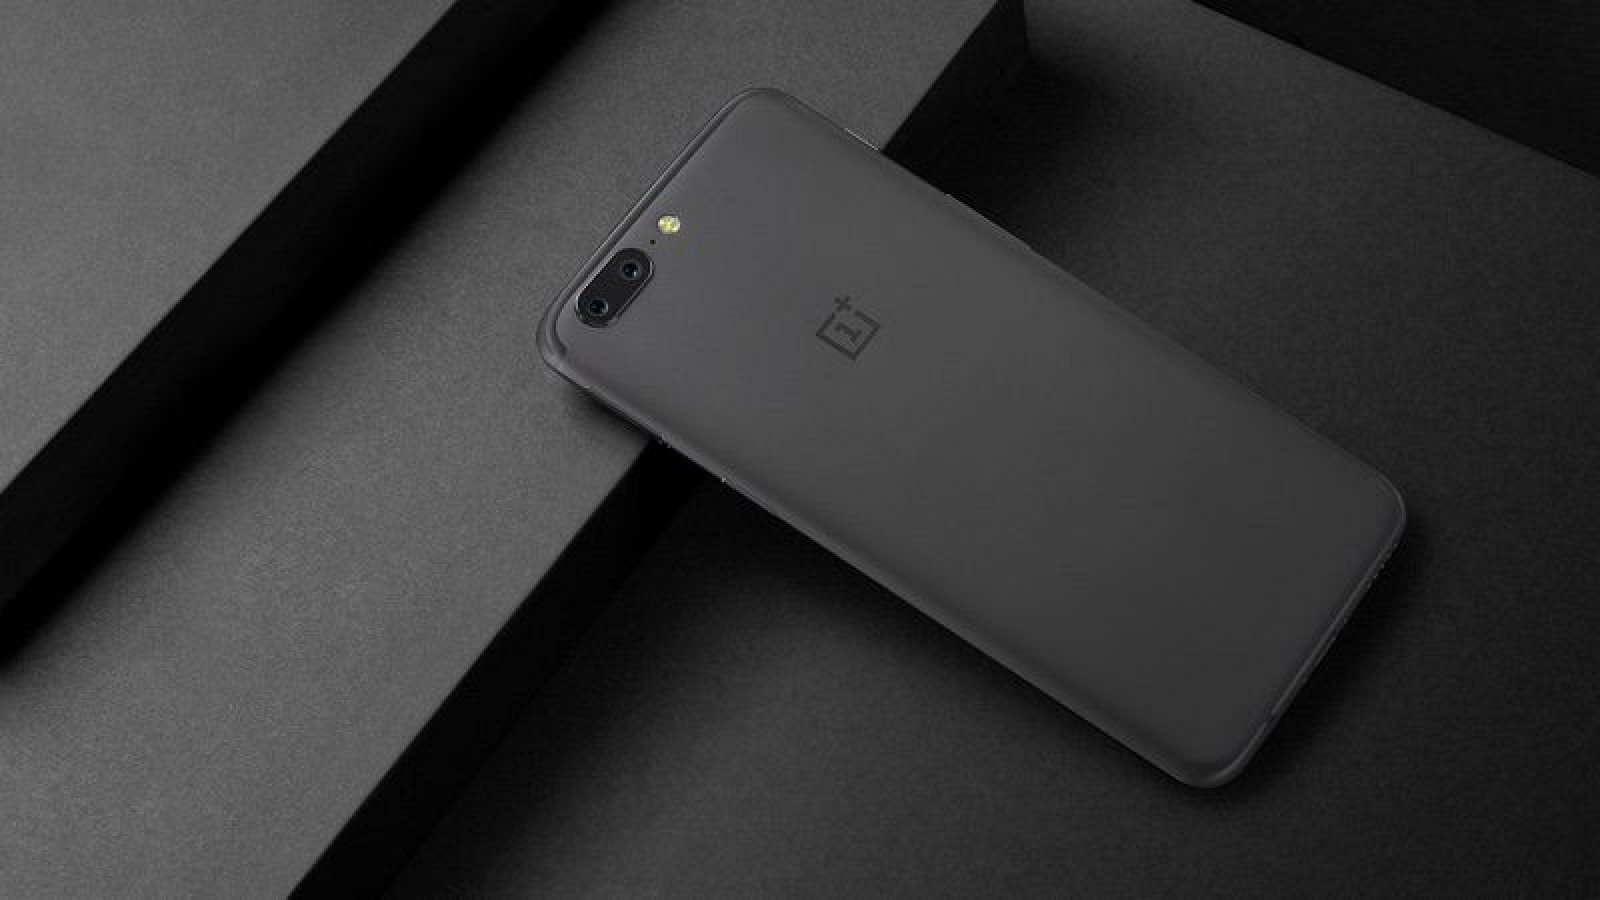 photo of OnePlus Mocks Removal of Headphone Jack in iPhone 7 While Copying its Design for New OnePlus 5 image